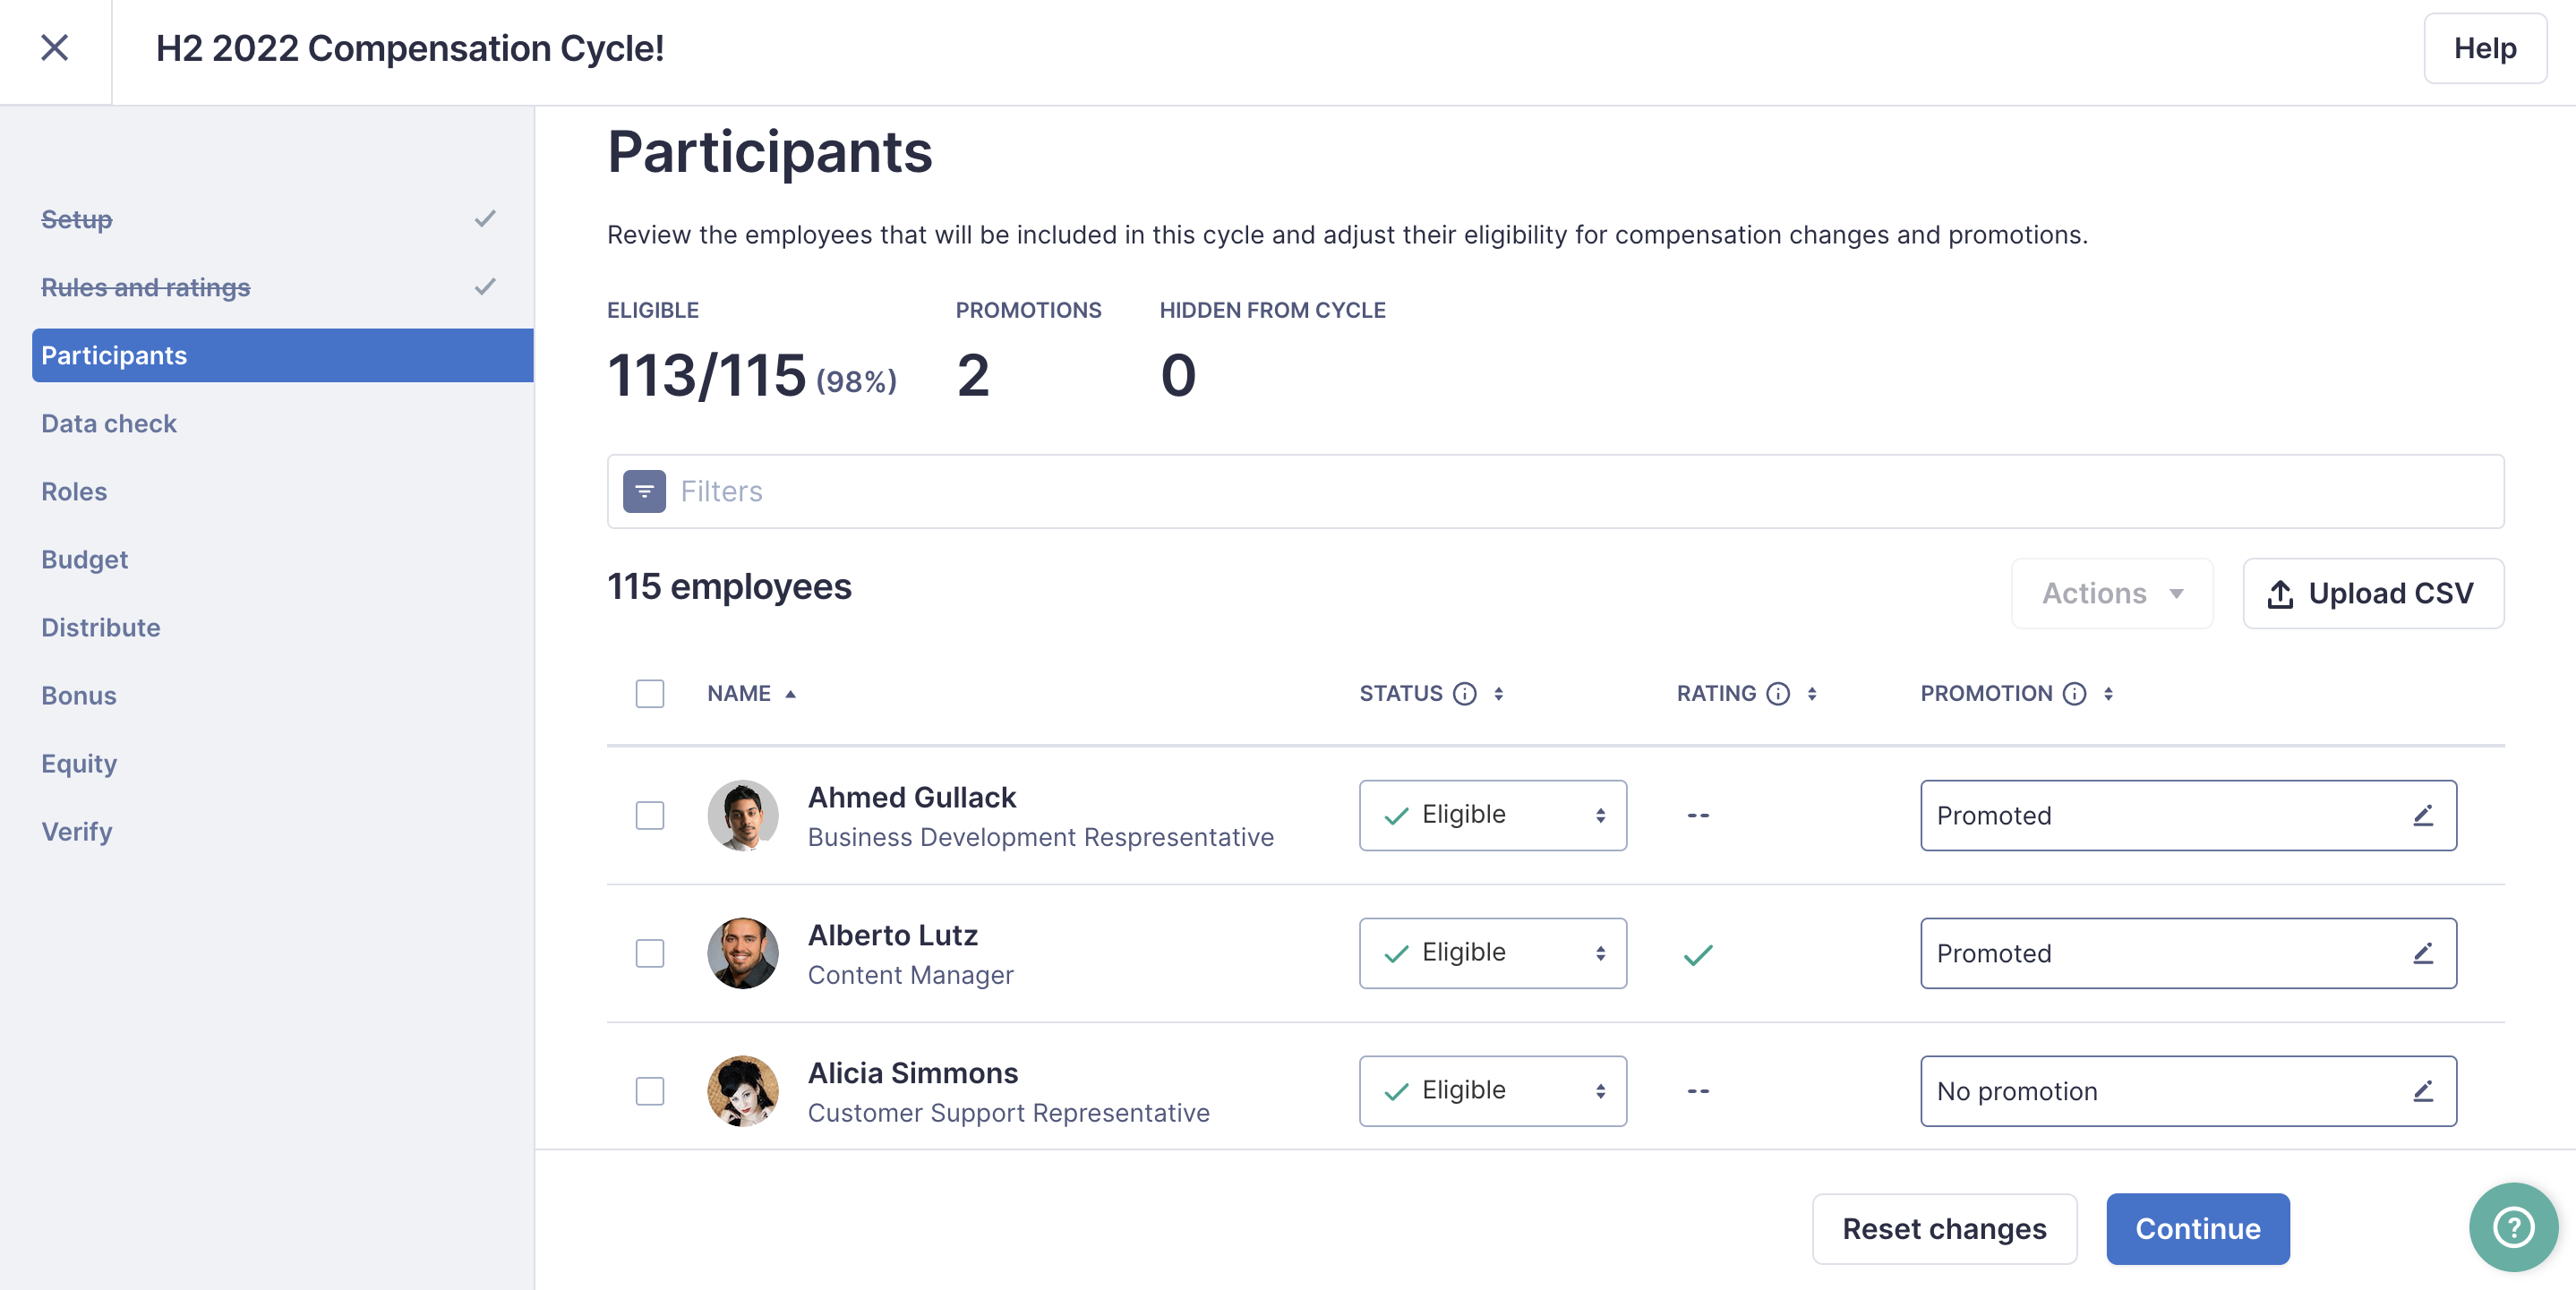 Image of Participants page in the Compensation setup